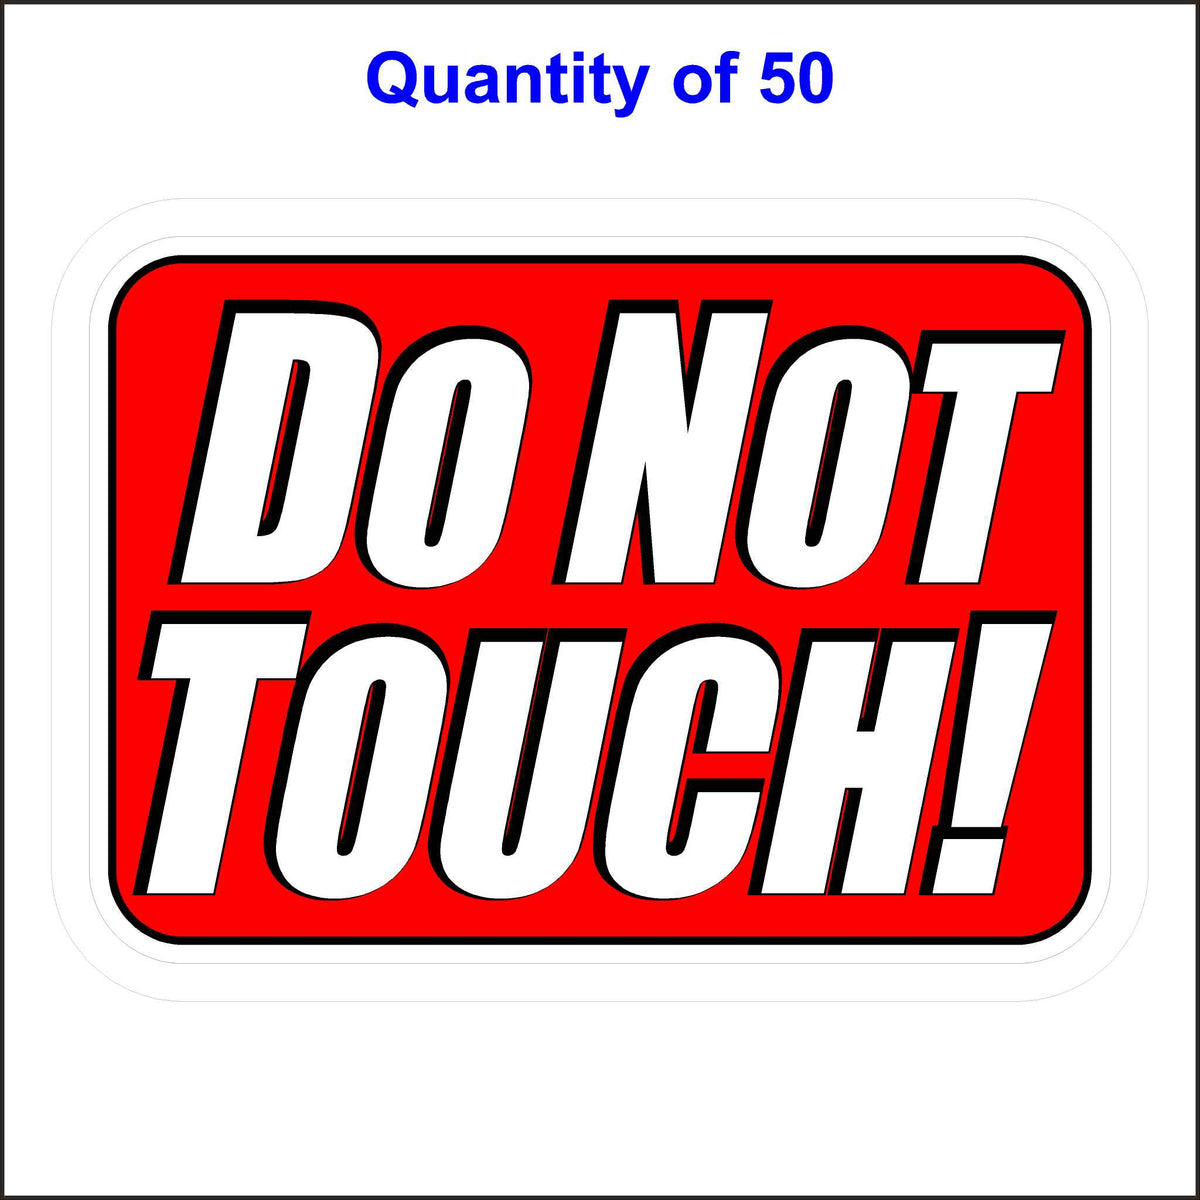 Do Not Touch Sticker With a Red Background and White Letters. 50 Quantity.